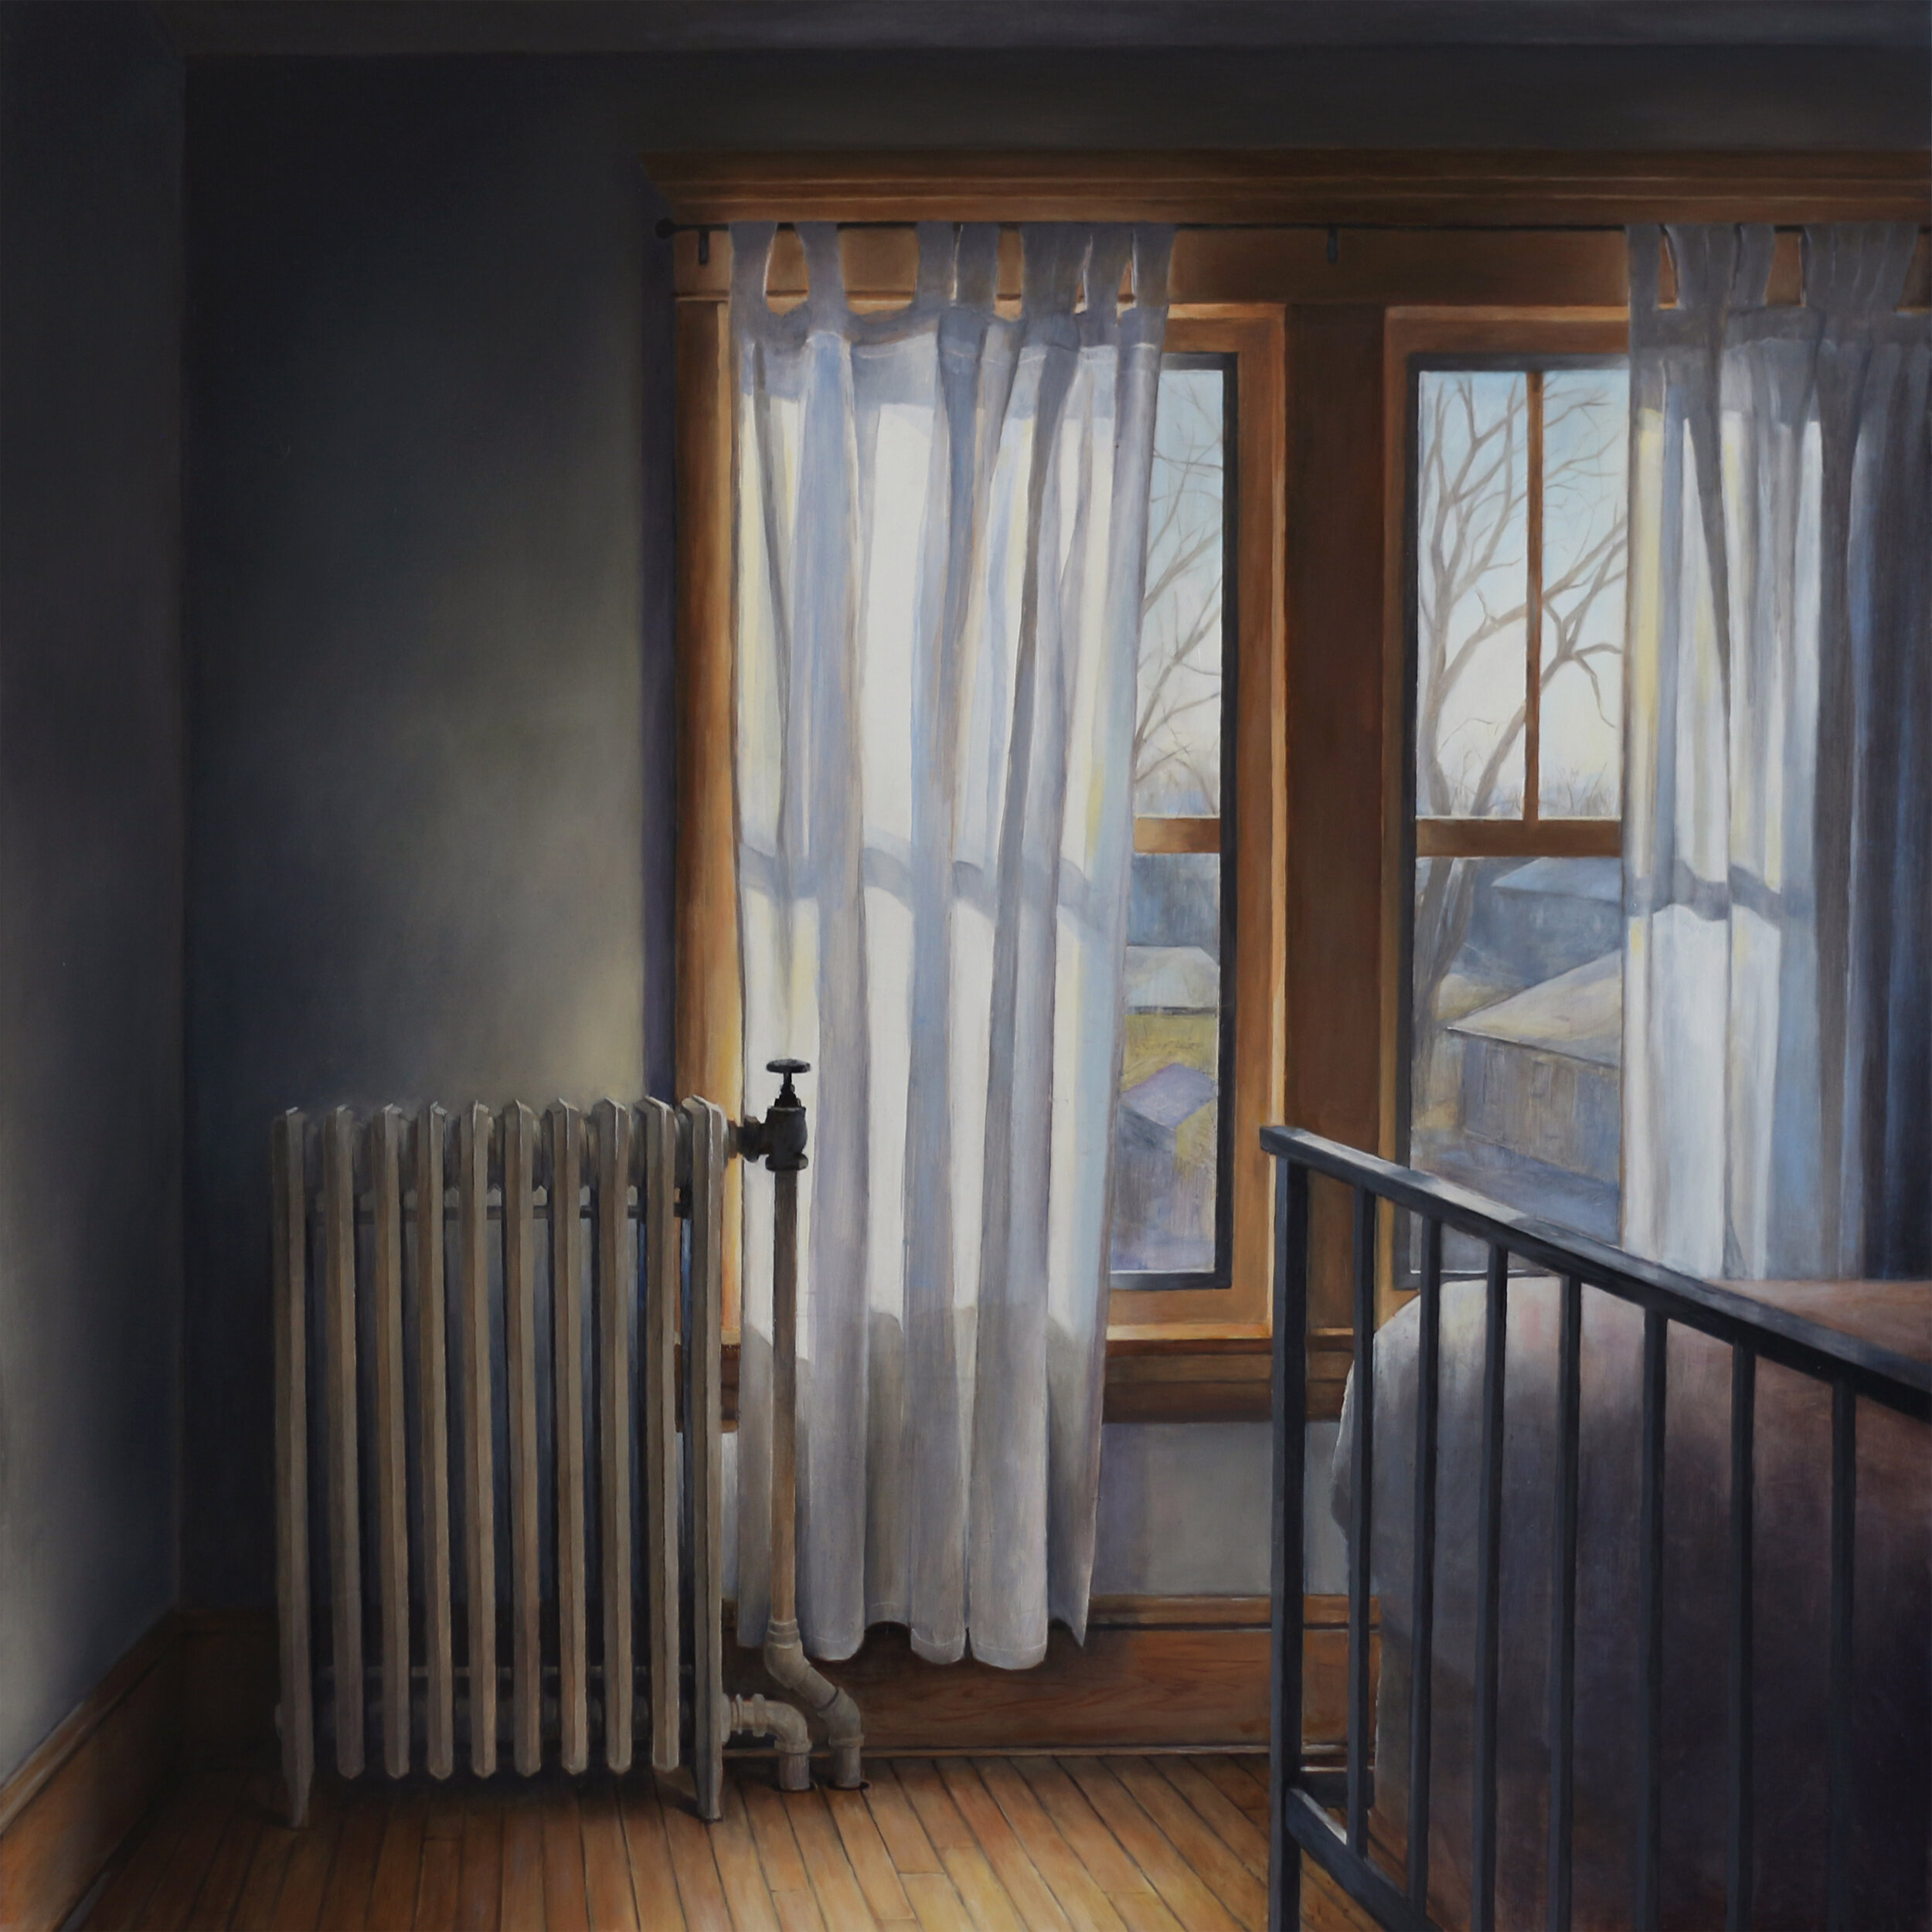   Bedroom in Morning Sun   2020  Oil on panel  24 x 24 inches       